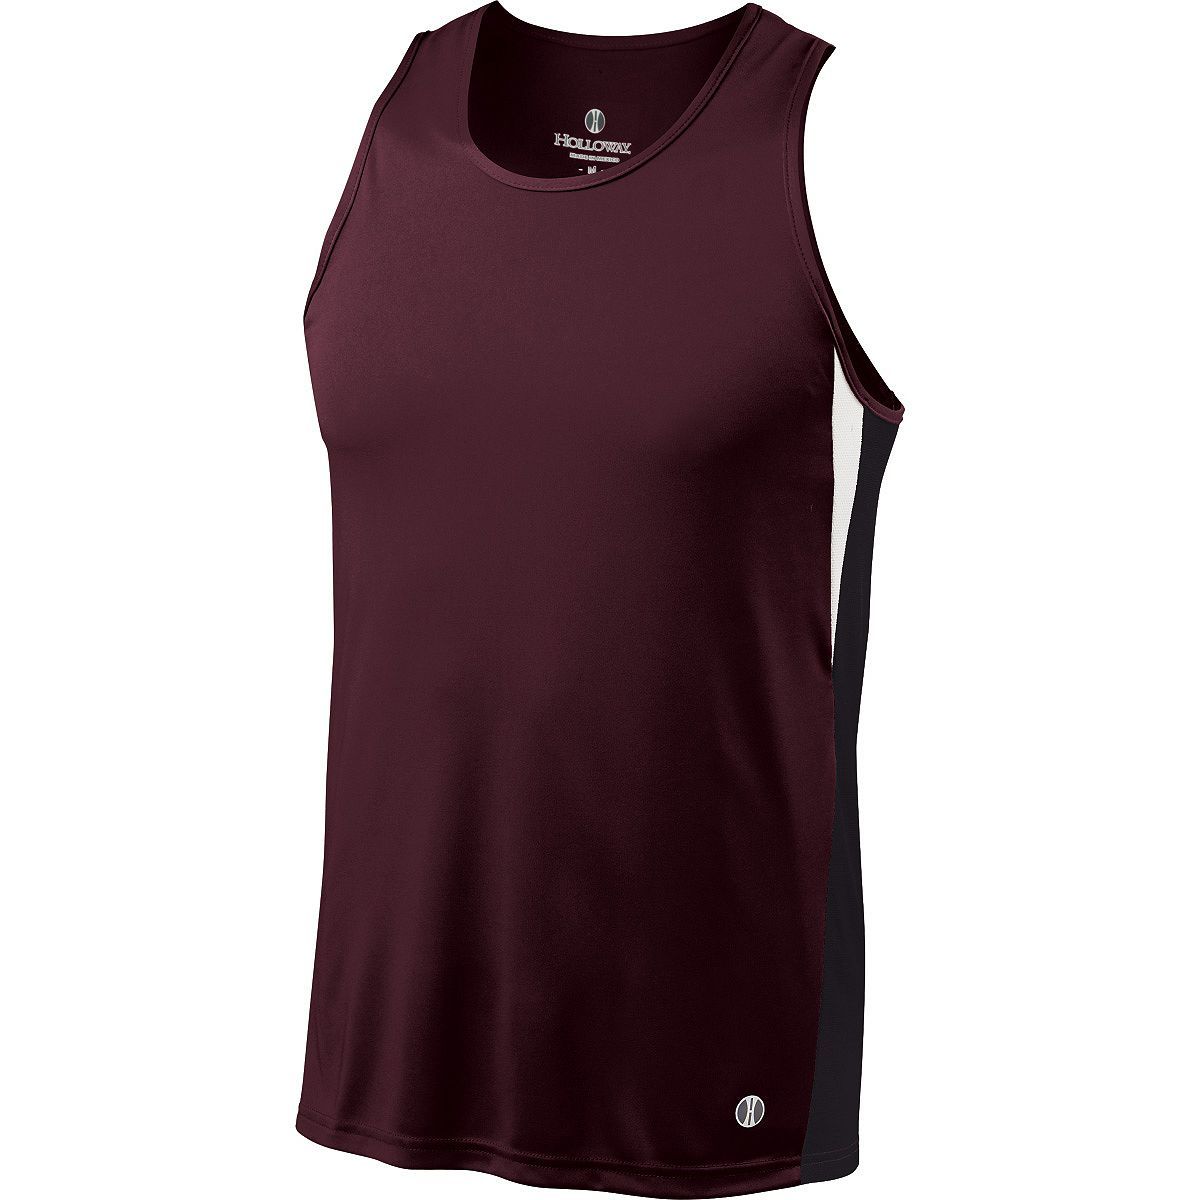 Holloway Vertical Singlet in Dark Maroon/Black/White  -Part of the Adult, Track-Field, Holloway, Shirts product lines at KanaleyCreations.com